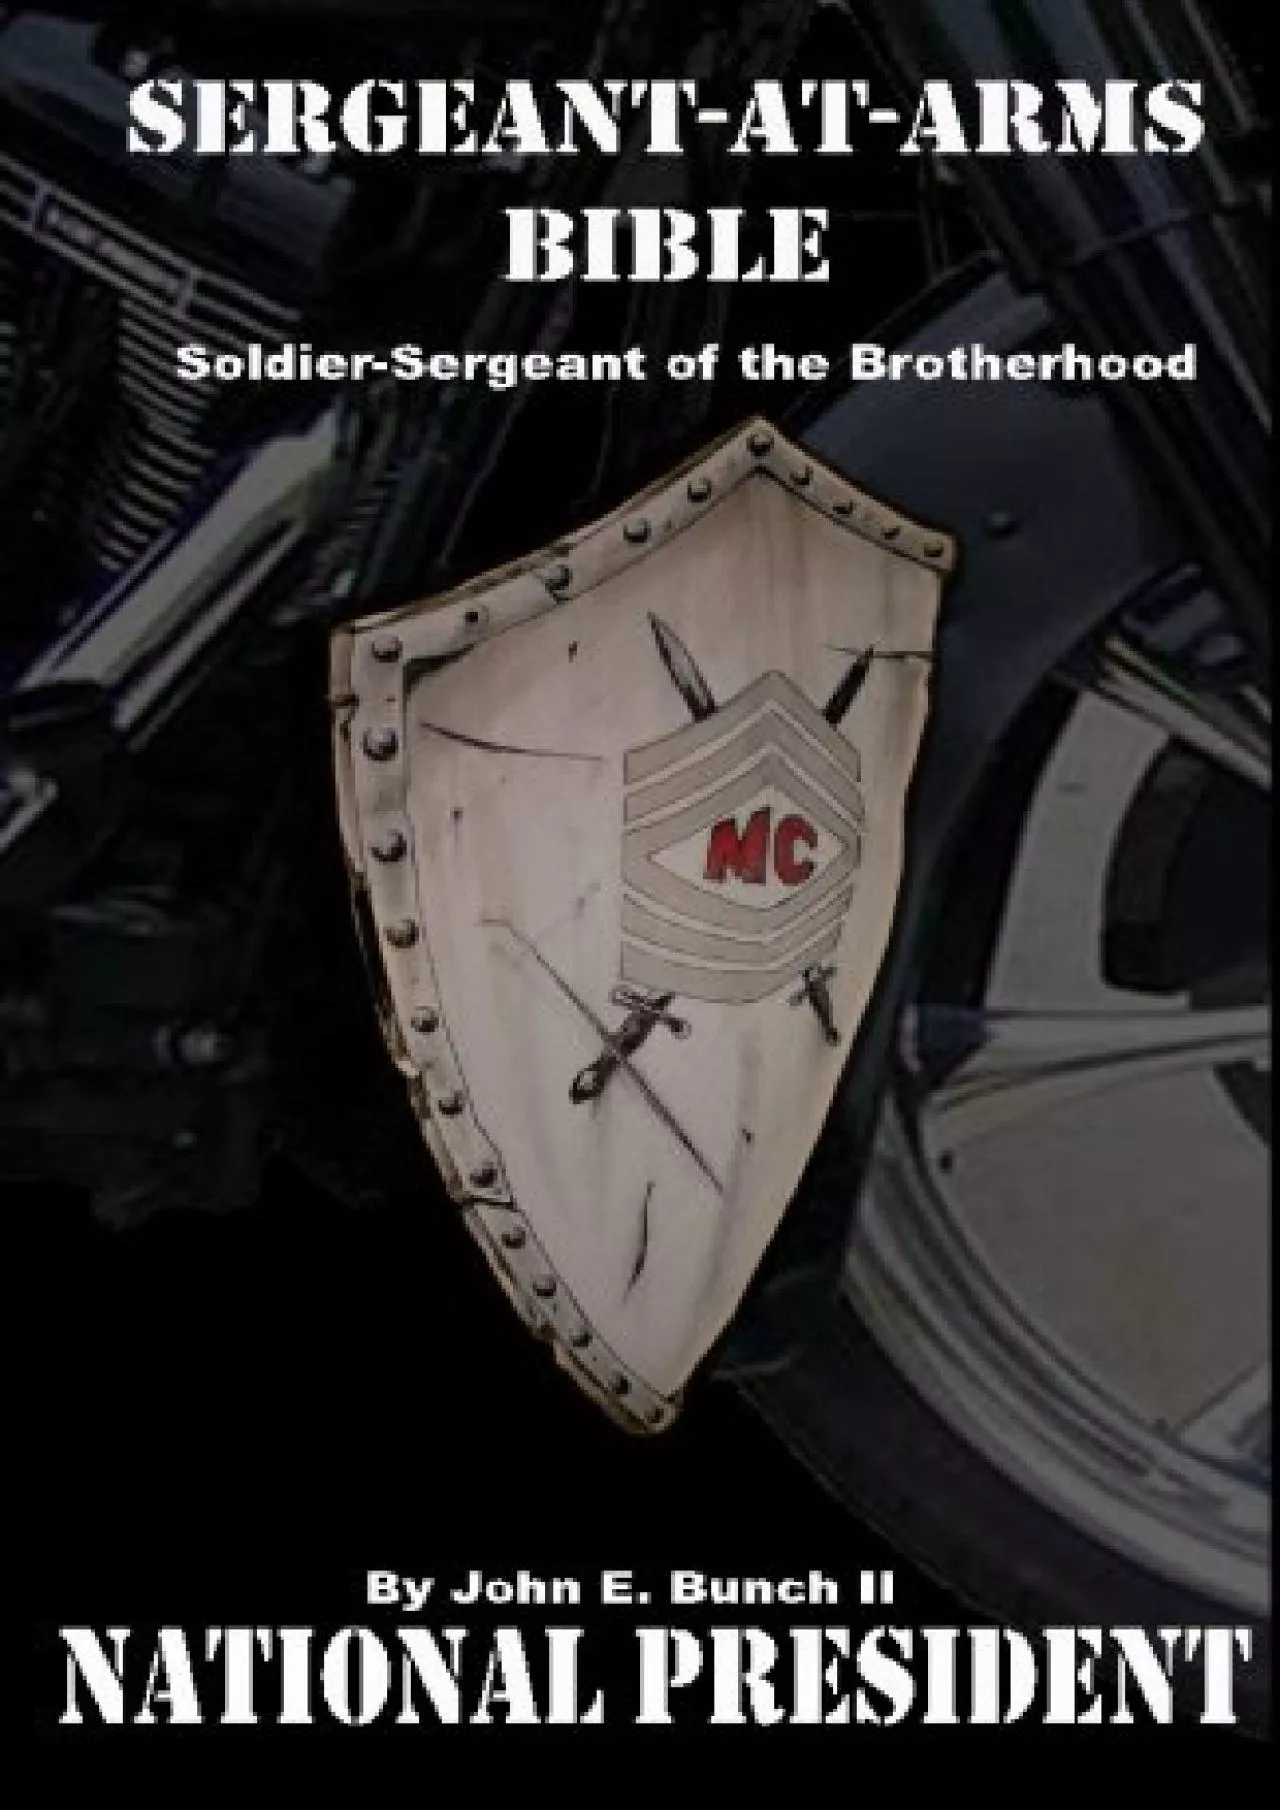 (BOOK)-Sergeant-at-Arms Bible: Soldier-Sergeant of the Brotherhood (Motorcycle Clubs Bible